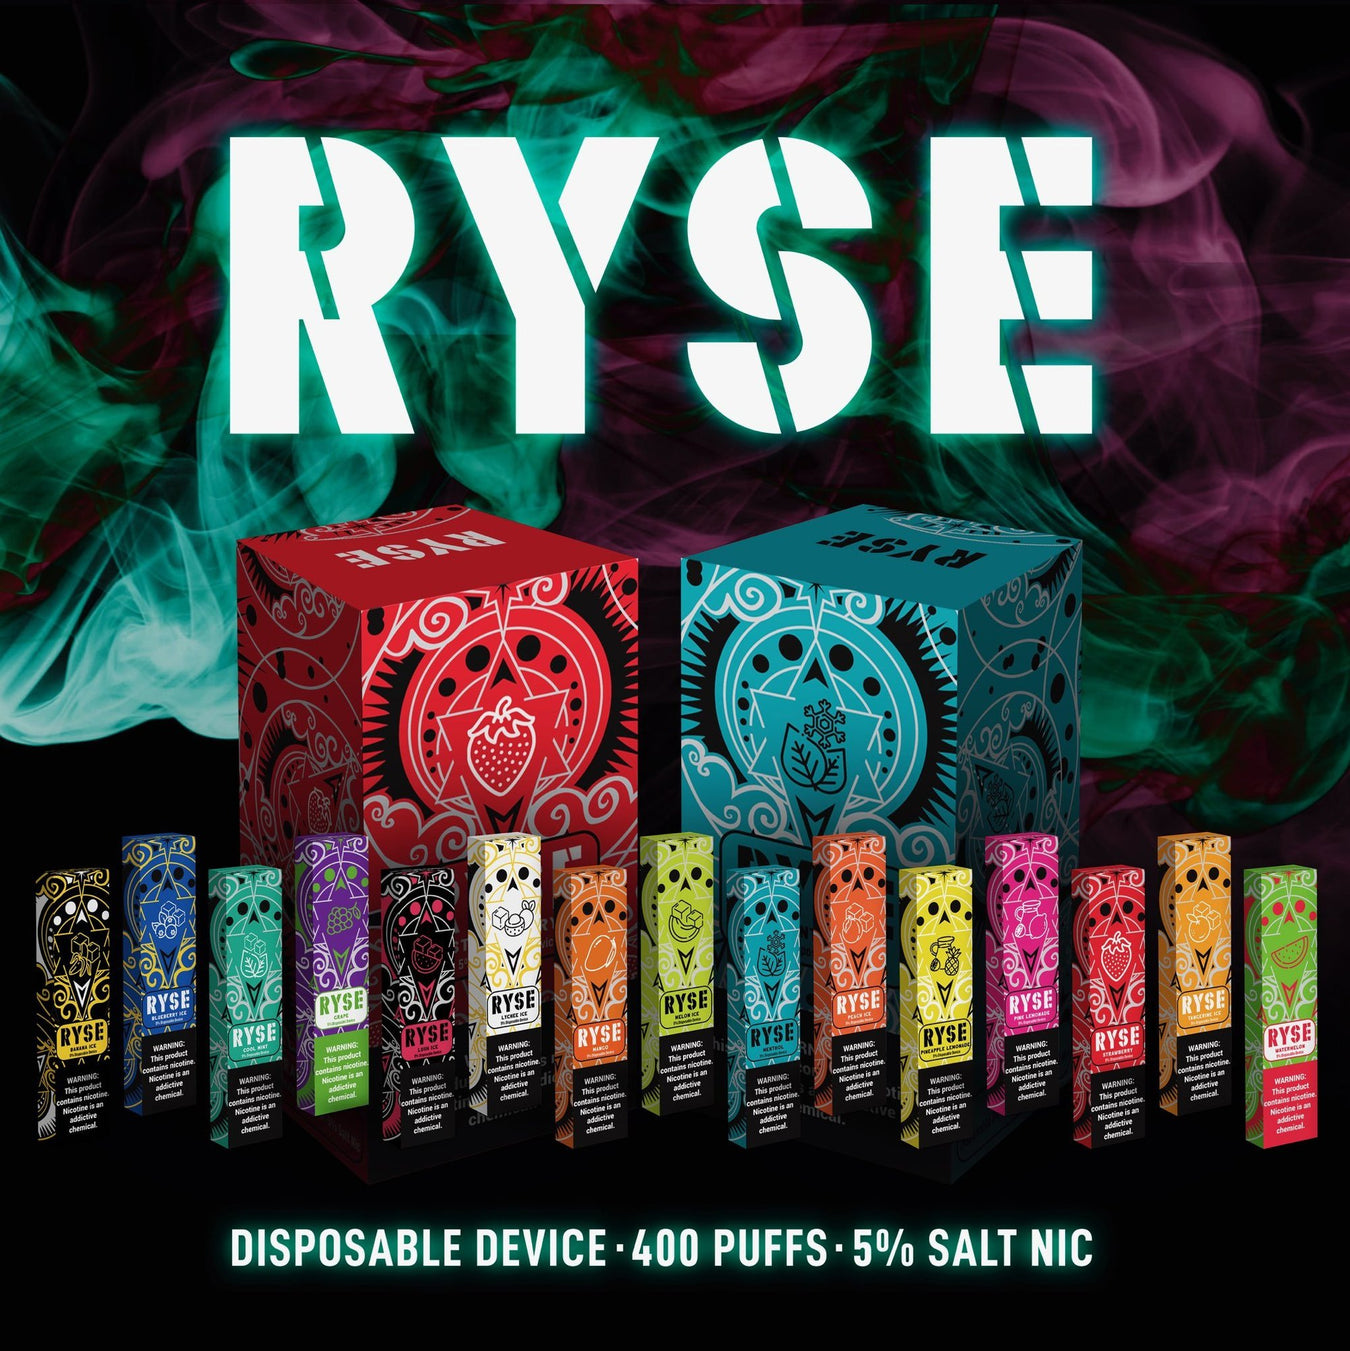 Ryse Disposable